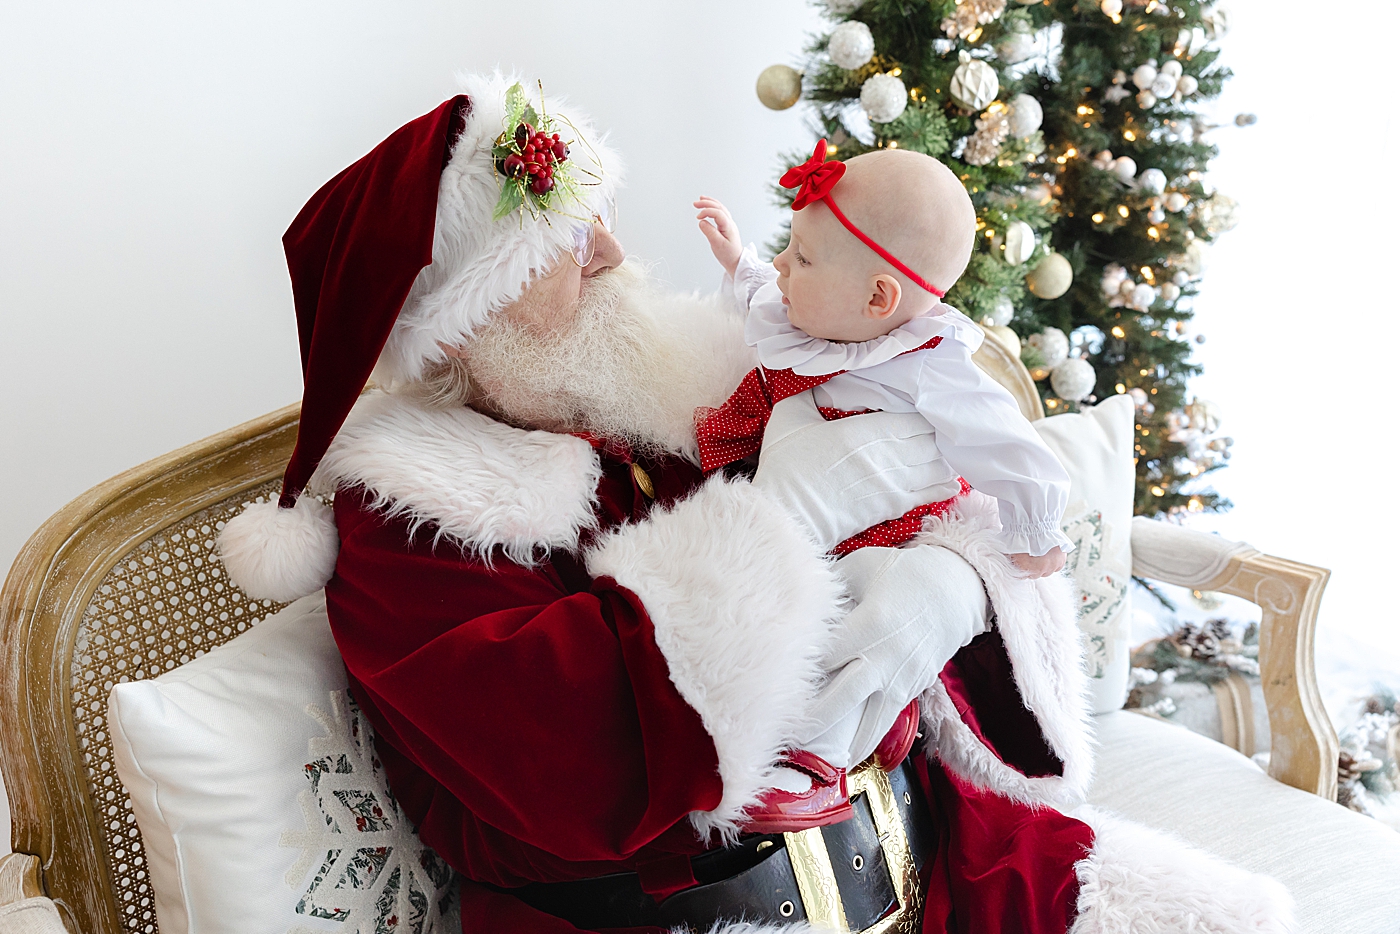 Santa holding a baby girl wearing a red bow | Image by Sana Ahmed Photography